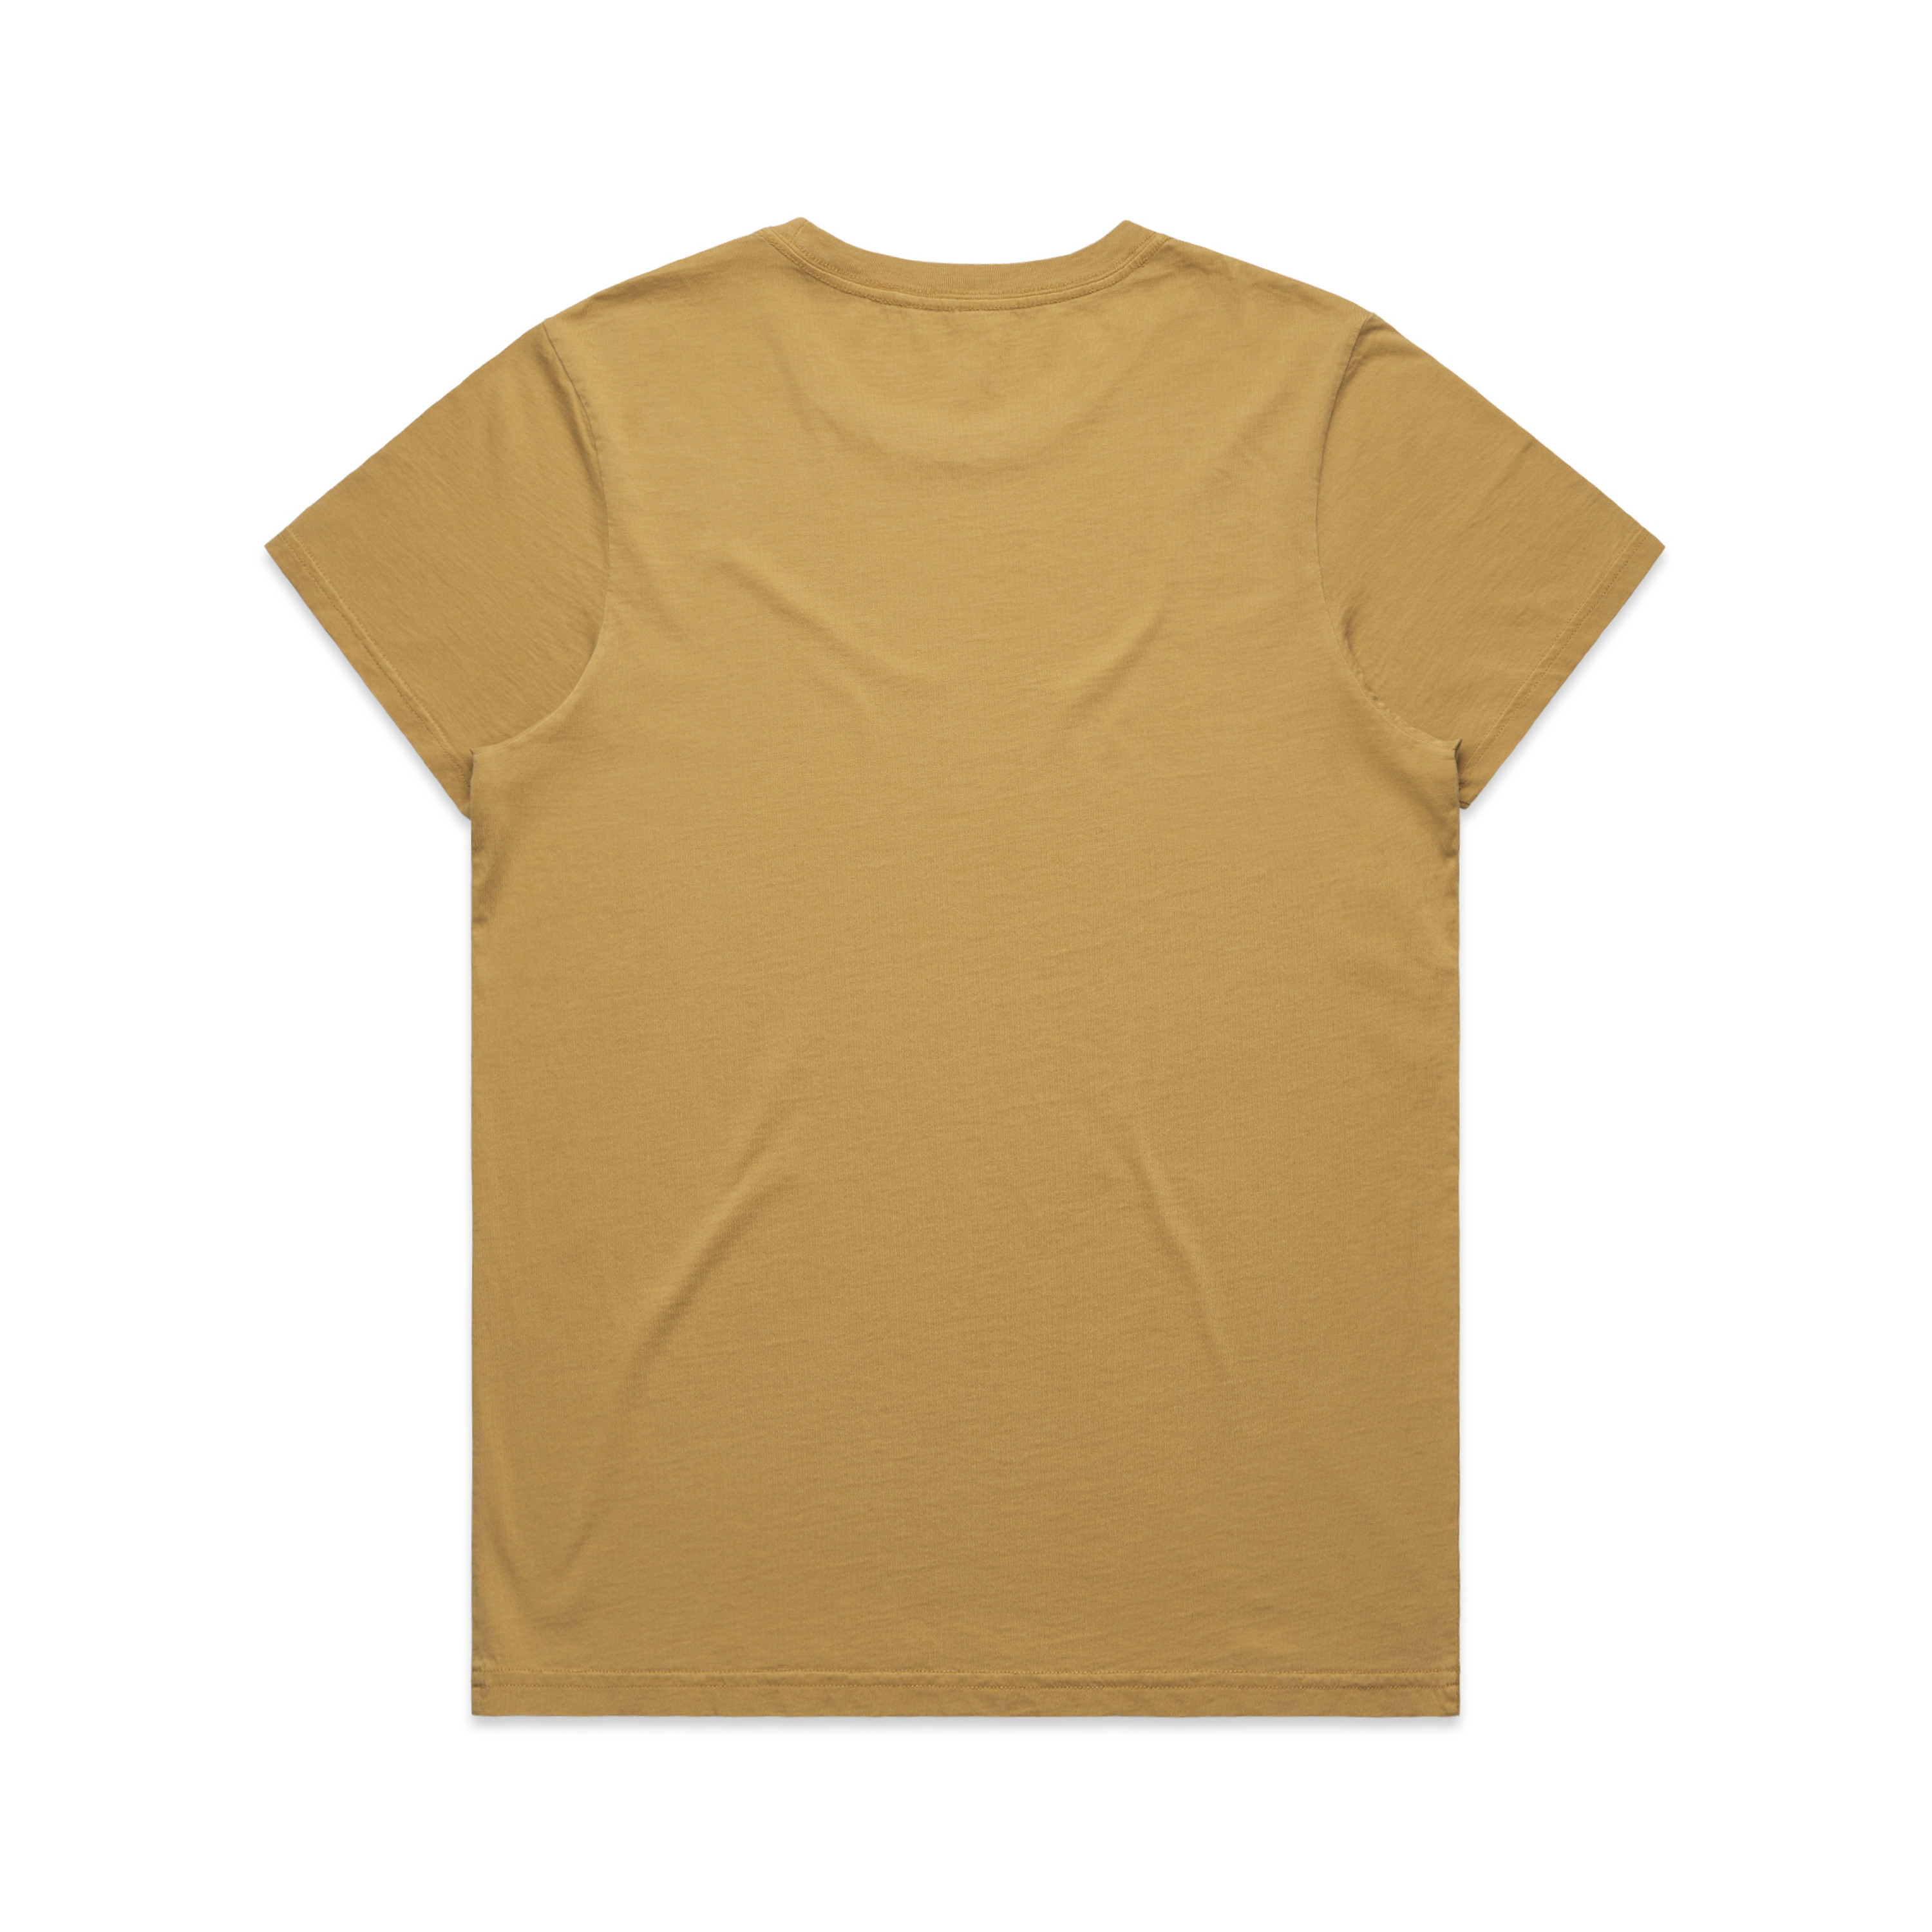 4065_WOS_FADED_TEE_FADED_MUSTARD_BACK__56865.1620097521